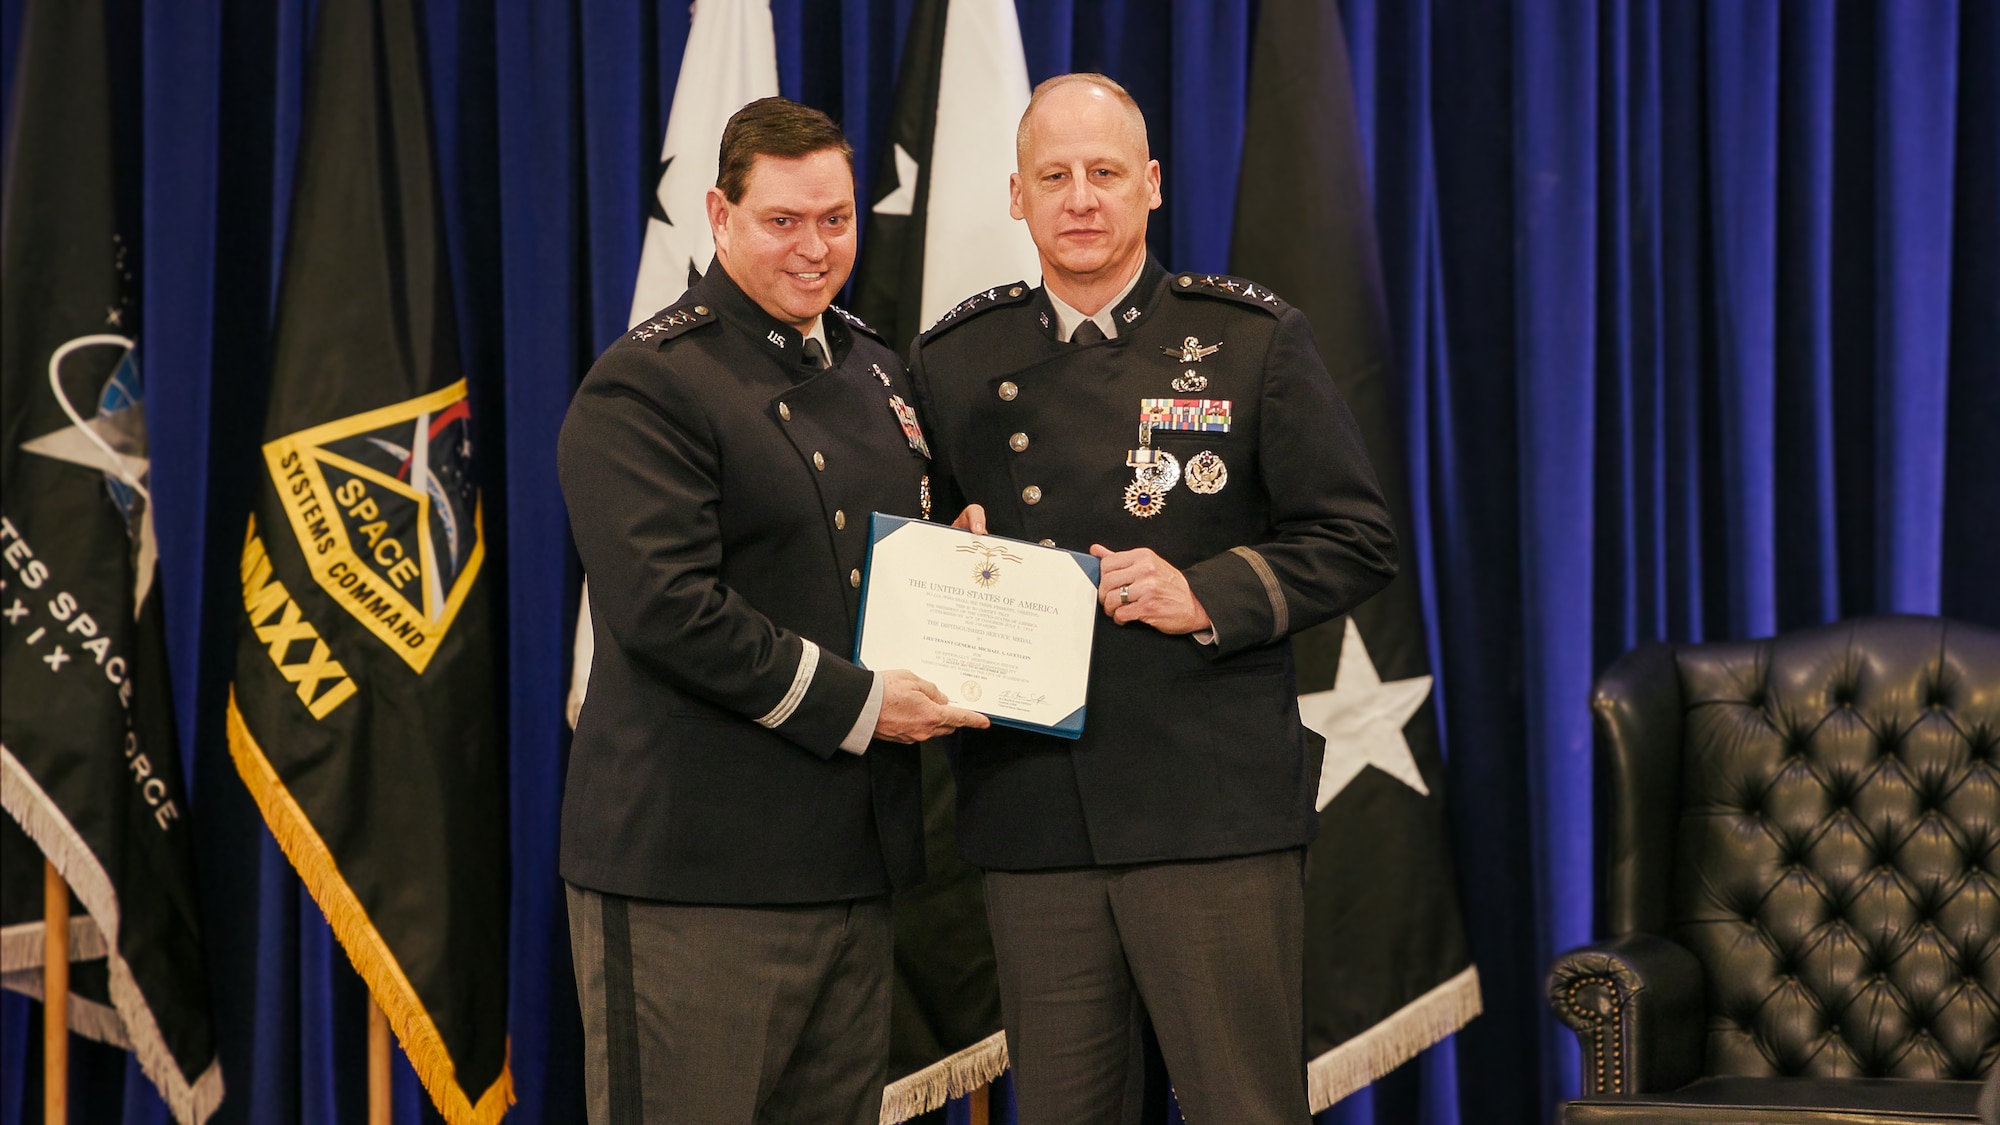 U.S. Space Force Gen. Chance Saltzman, Chief of Space Operations, presents a U.S. Air and Space Forces Distinguished Service Medal to U.S. Space Force Gen. Michael Guetlein, Space Systems Command’s (SSC) first commander and the USSF’s newest Vice Chief of Space of Operations, for his distinctive accomplishments and leadership during the SSC change of command ceremony Feb. 1, 2024, at SSC headquarters on Los Angeles Air Force Base in El Segundo, Calif. “For the last few years, this command has continued to fast-track space innovation under the leadership of its first and only commander, Gen. Mike Guetlein,” said Saltzman. “This team’s many historic achievements since its stand-up are a testament to the talent and the determinization of our Guardians…and equally as important, are a testament to the leadership of your commander.”